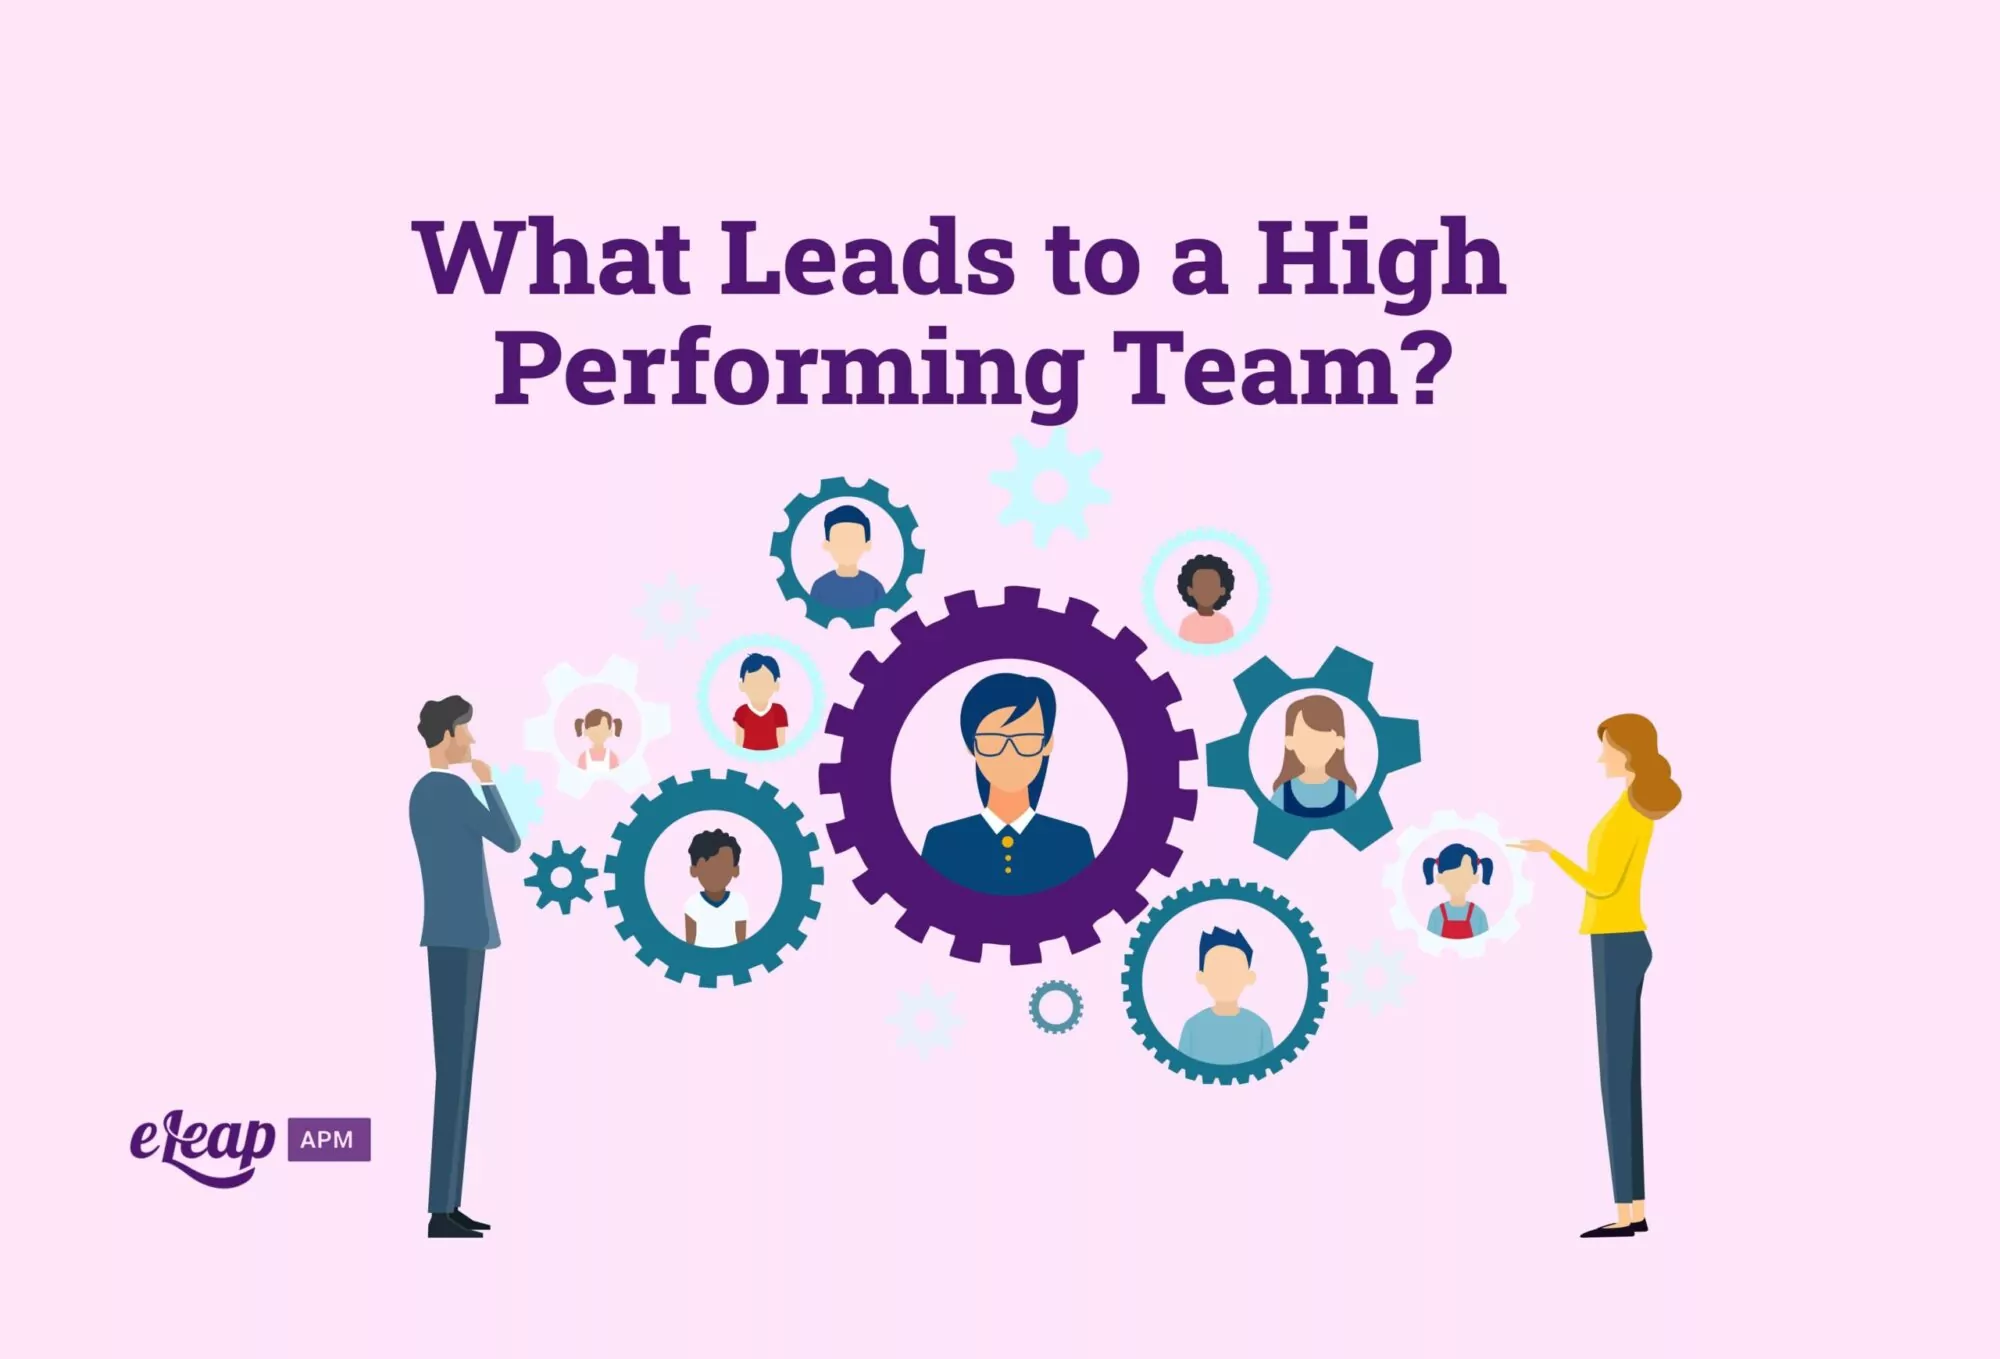 What Leads to a High Performing Team?